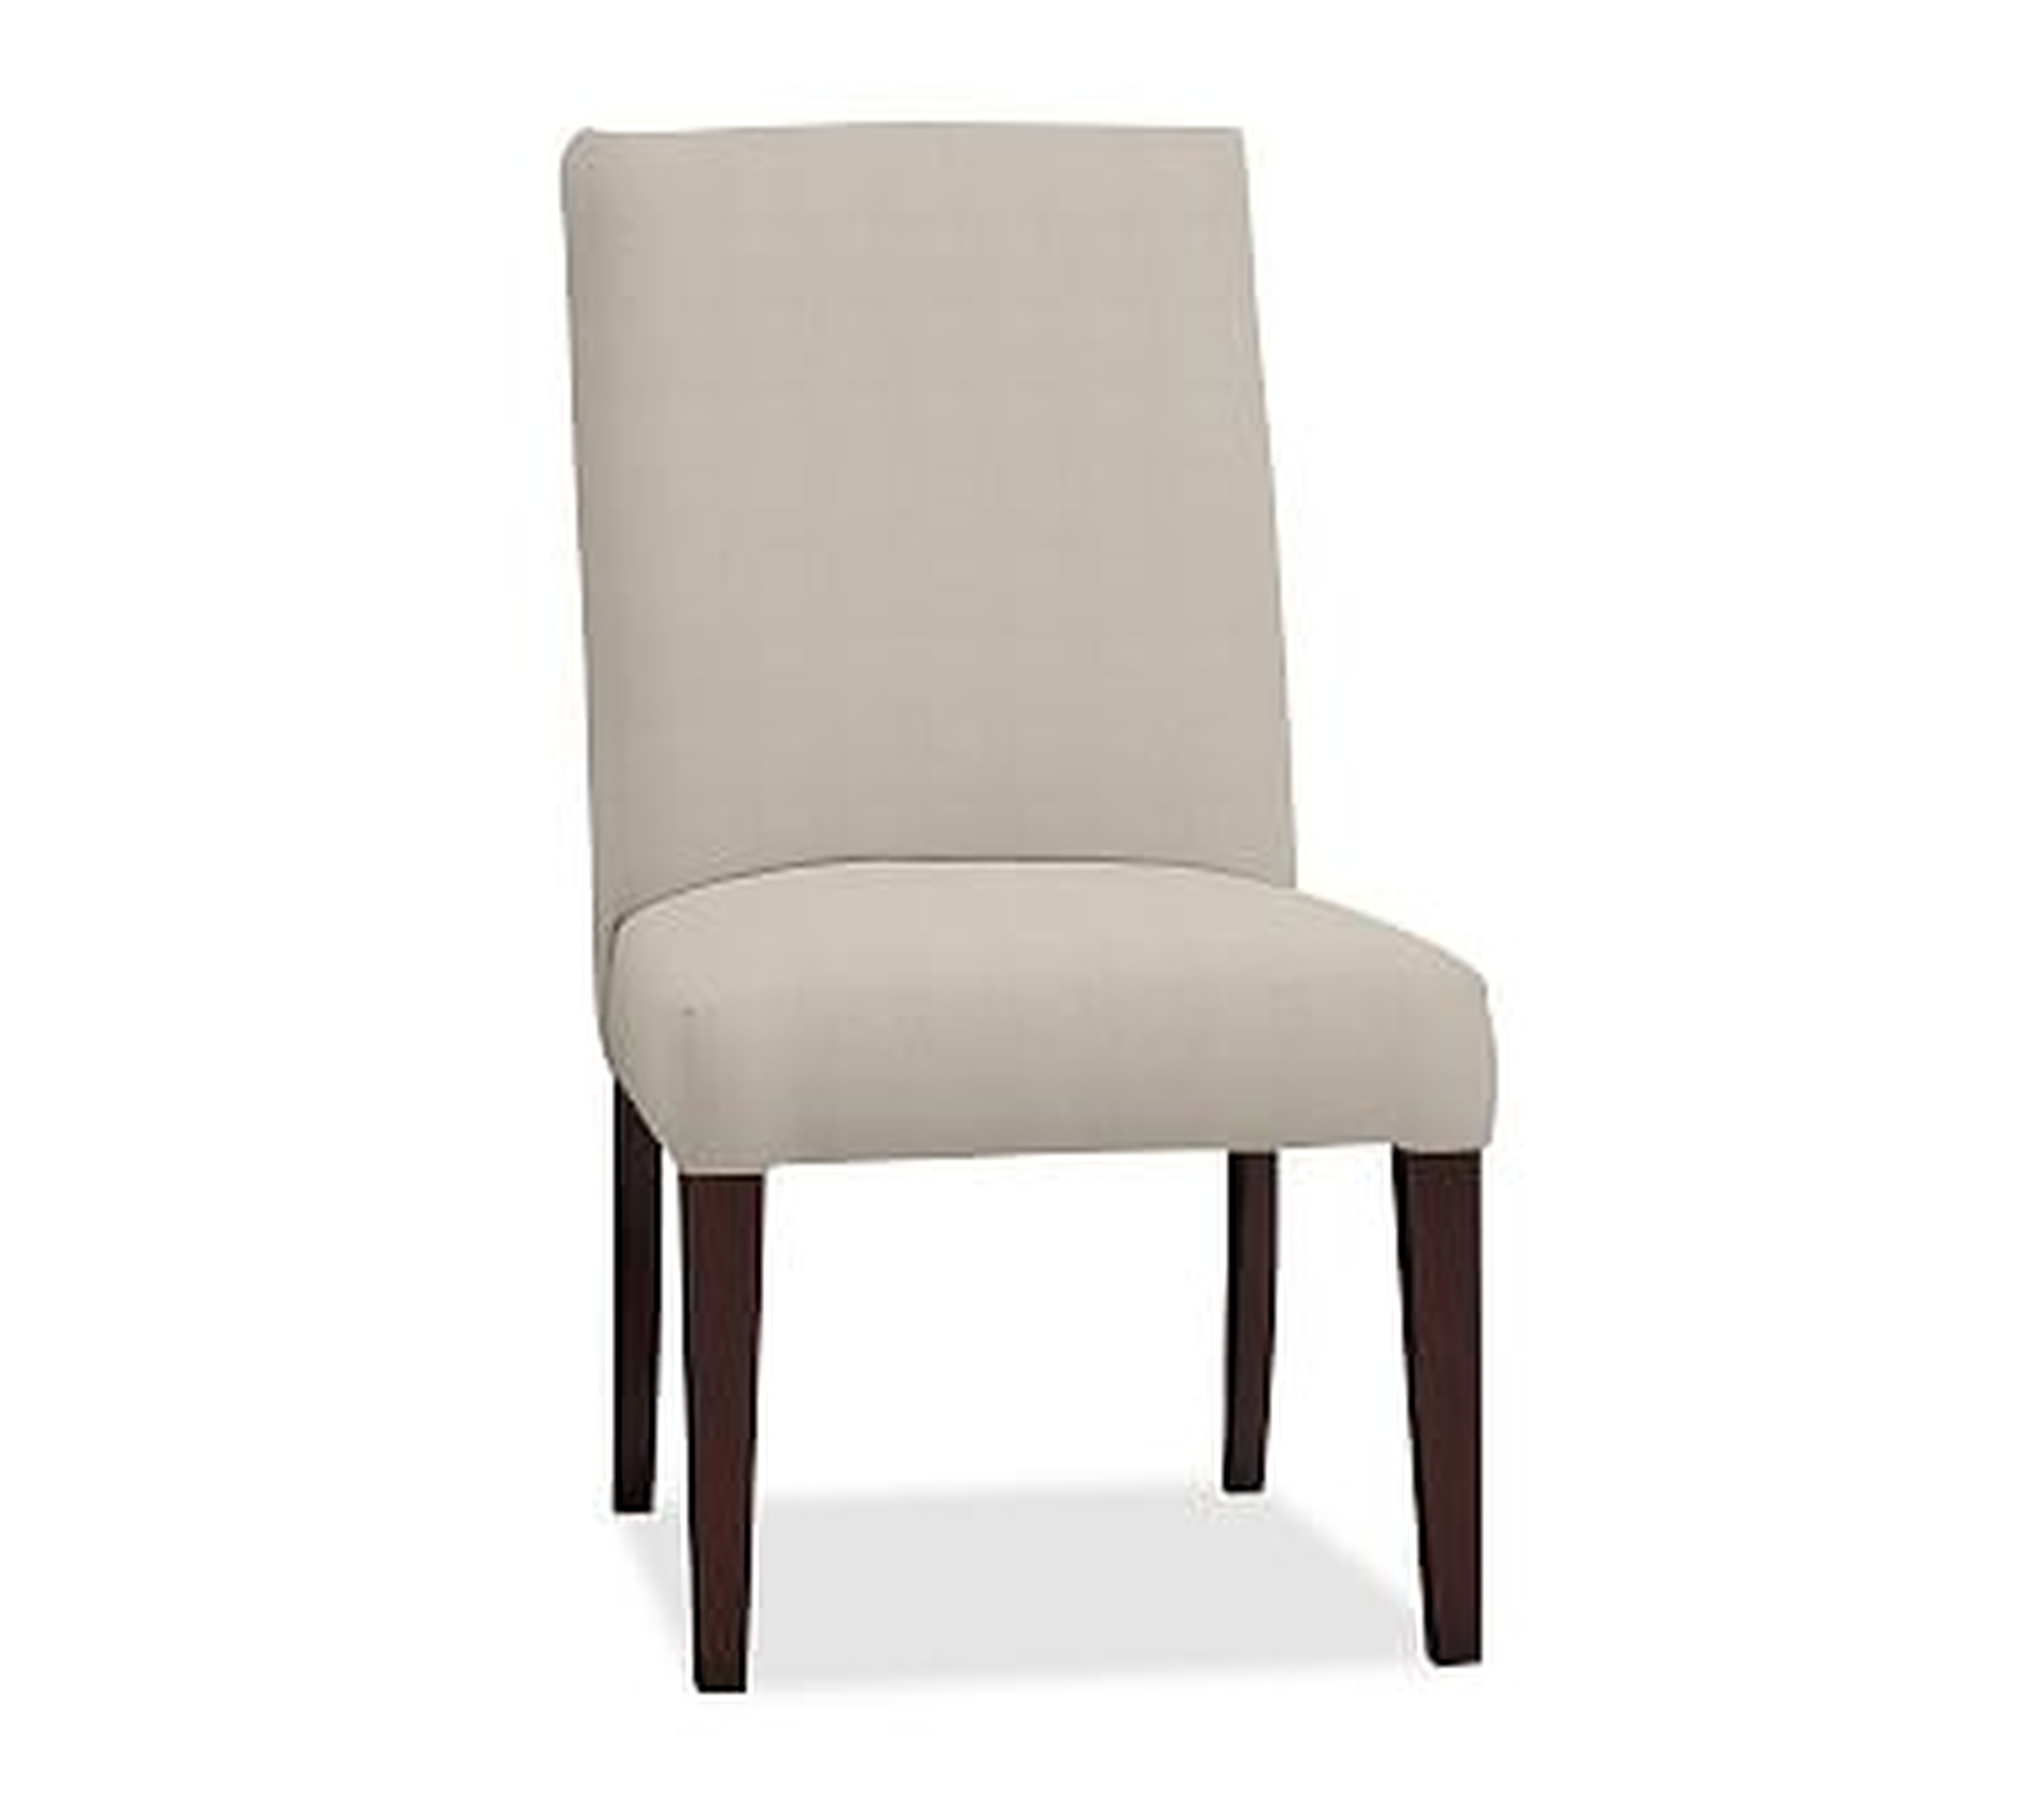 PB Comfort Square Upholstered Dining Side Chair, Brushed Crossweave Natural, Espresso Leg - Pottery Barn